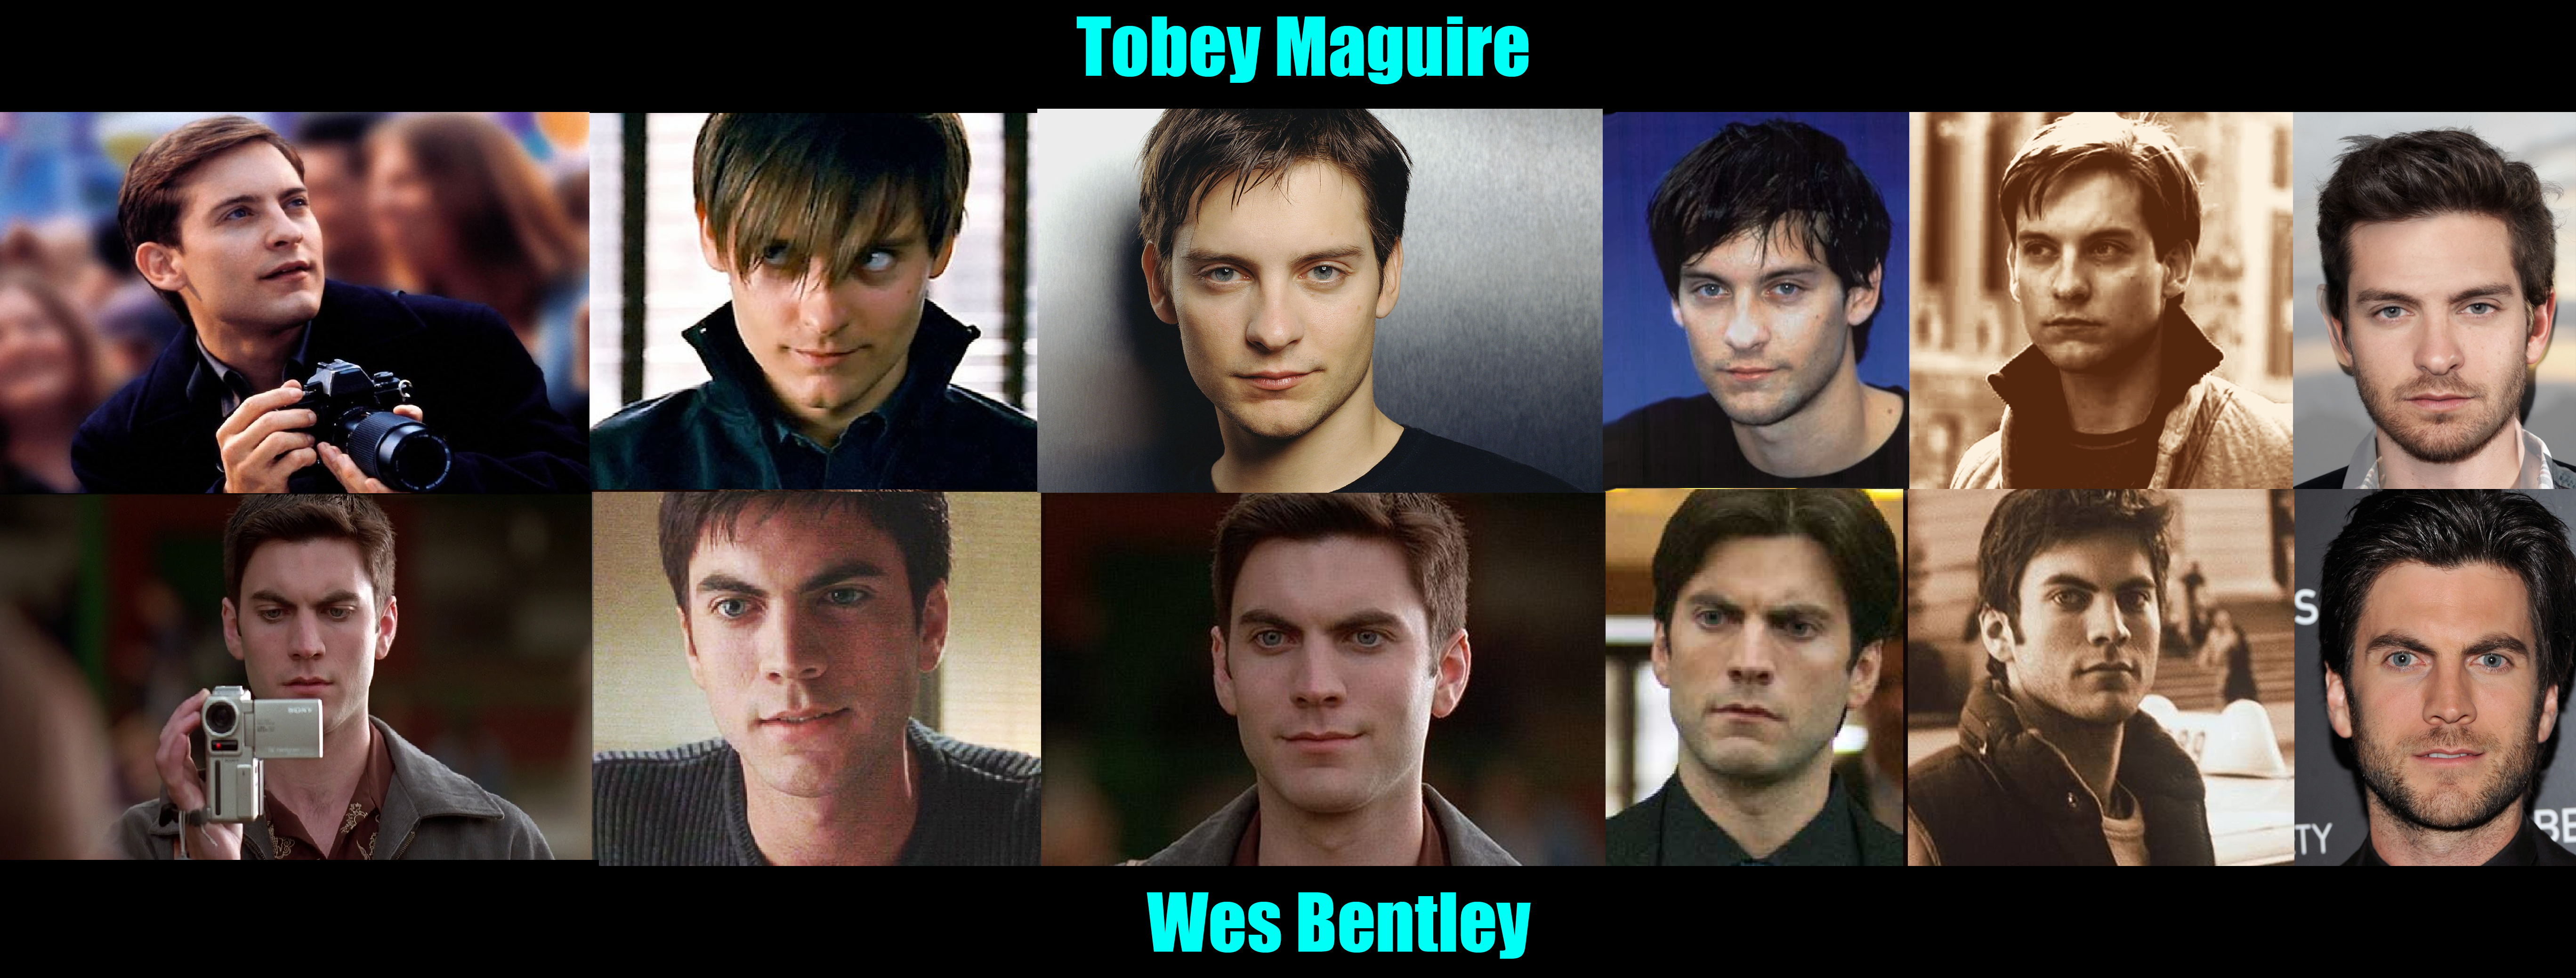 Tobey Maguire And Wes Bentley Long Lost Twins By Scoutsneerplz On Deviantart